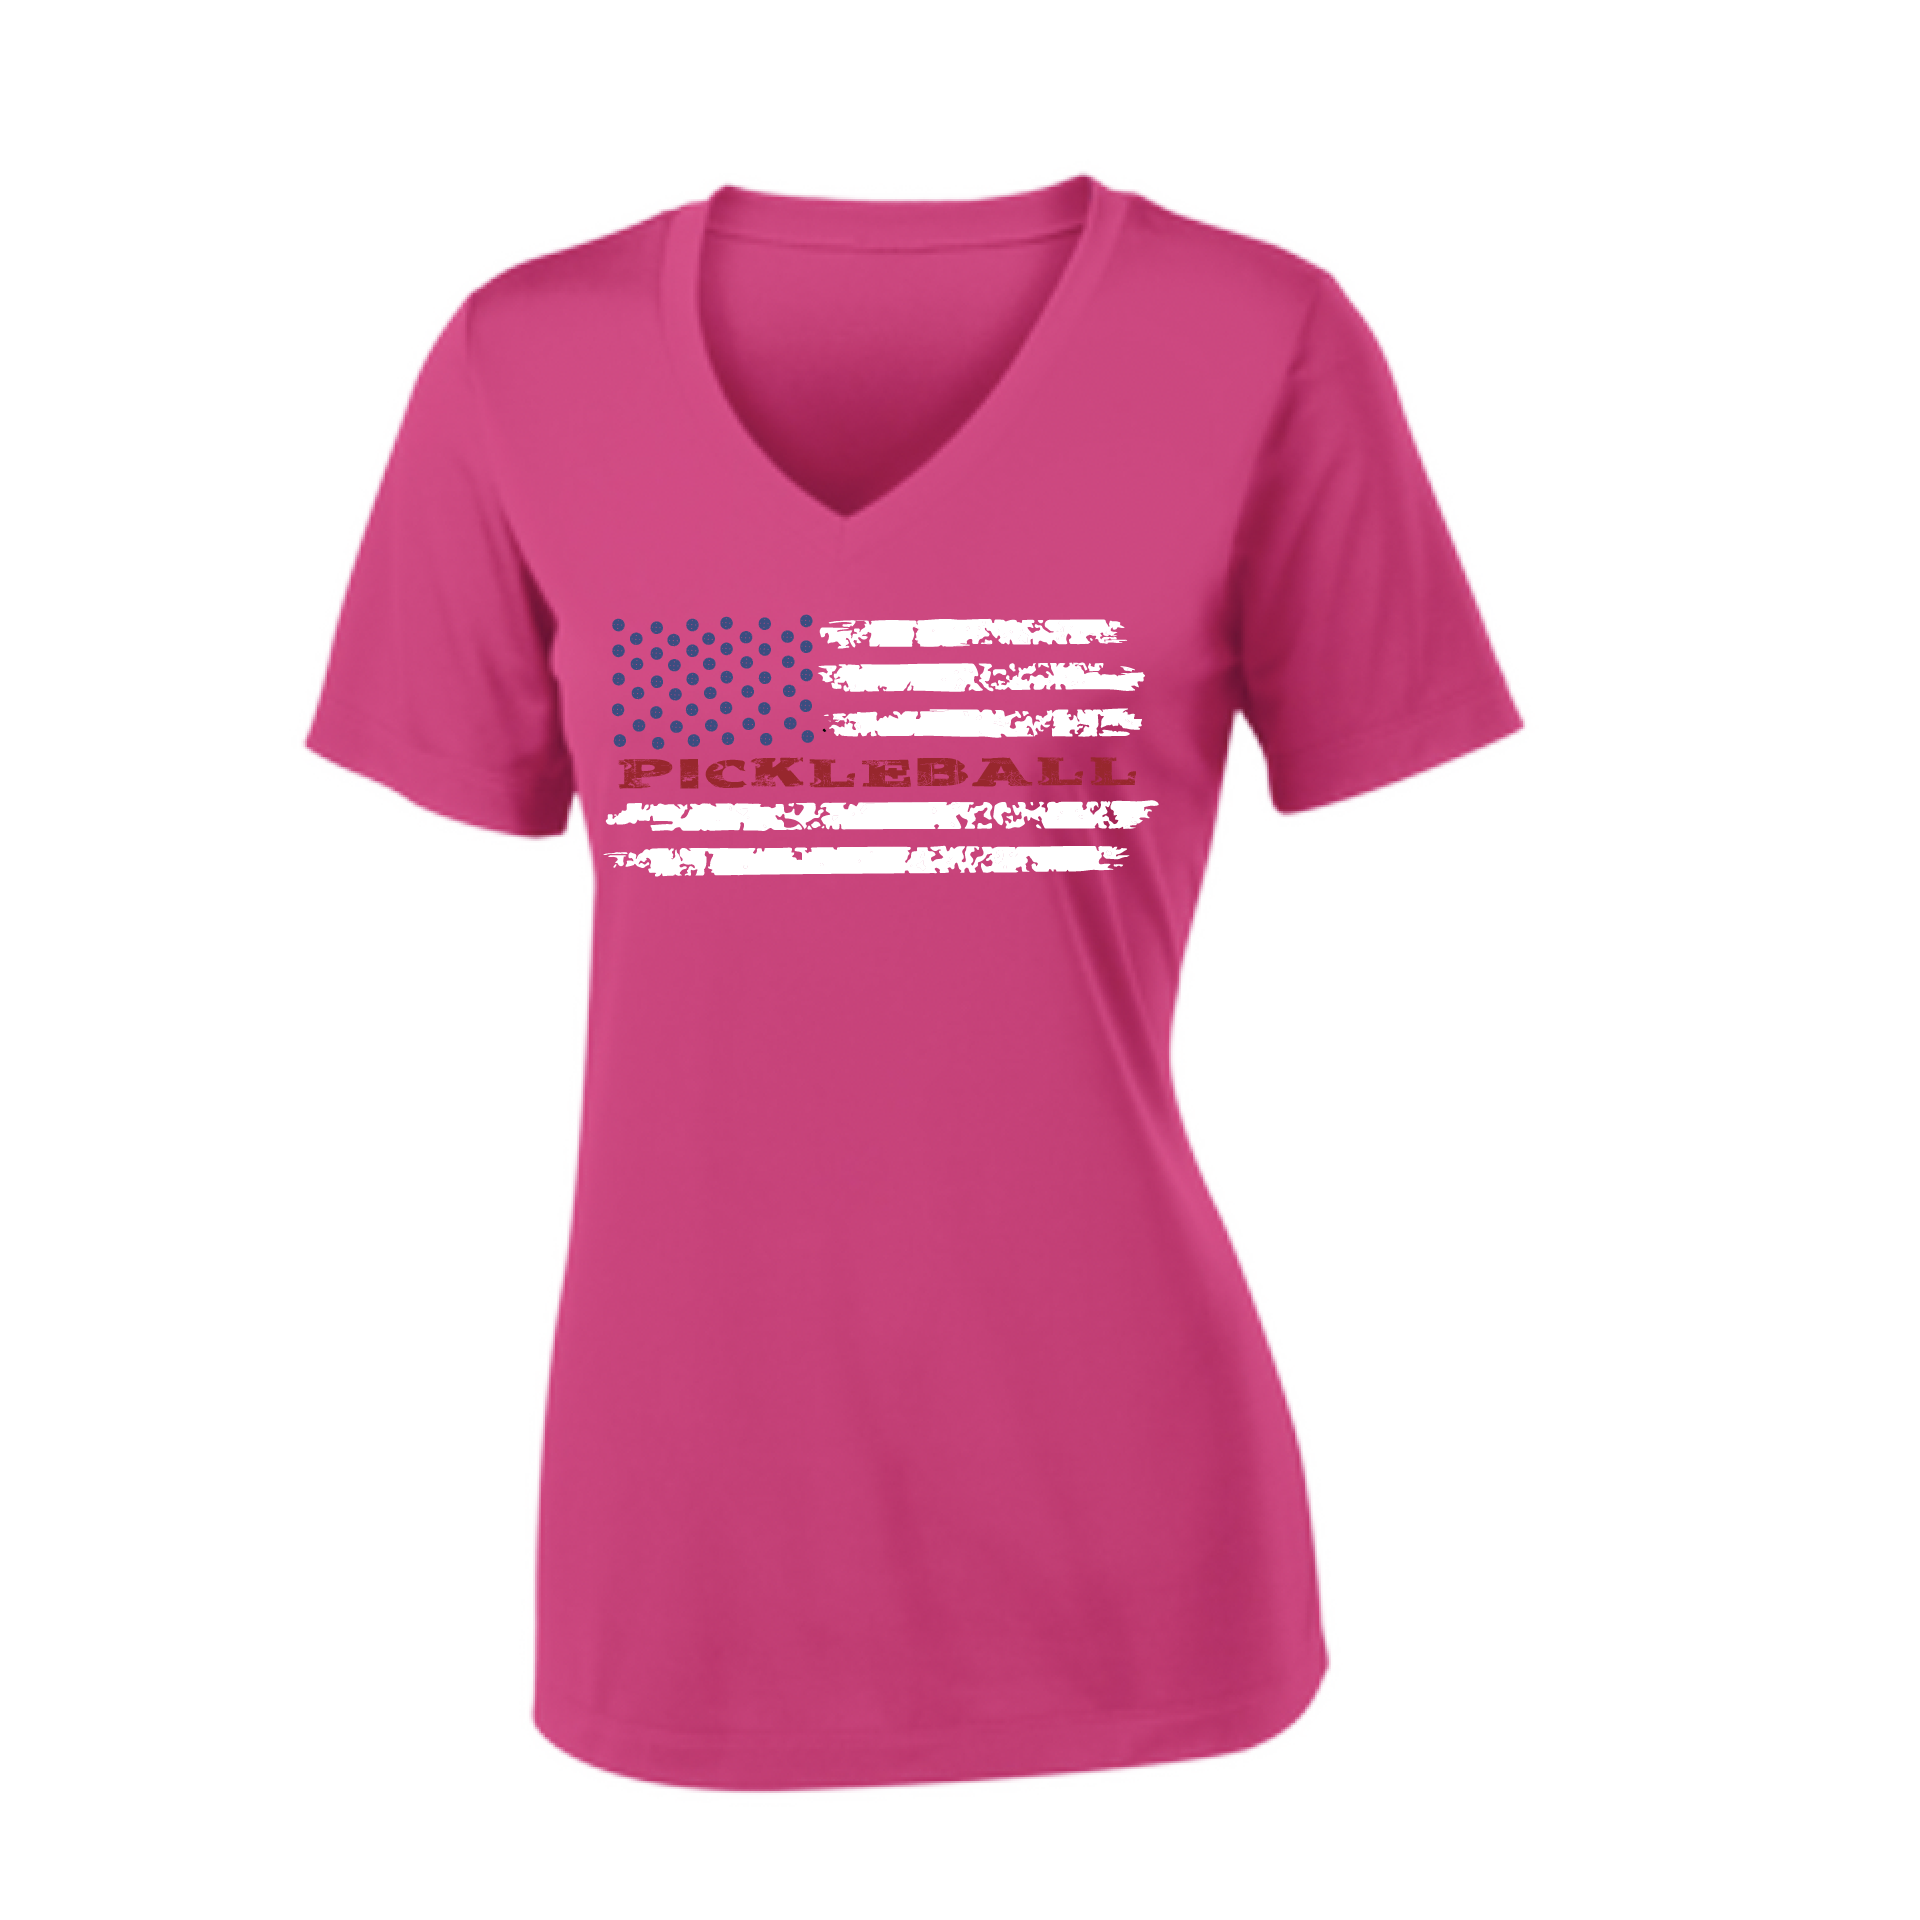 Pickleball Design: Flag Horizontal on Front or Back of Shirt  Women's Style: Short-Sleeve V-Neck  Turn up the volume in this Women's shirt with its perfect mix of softness and attitude. Material is ultra-comfortable with moisture wicking properties and tri-blend softness. PosiCharge technology locks in color. Highly breathable and lightweight.